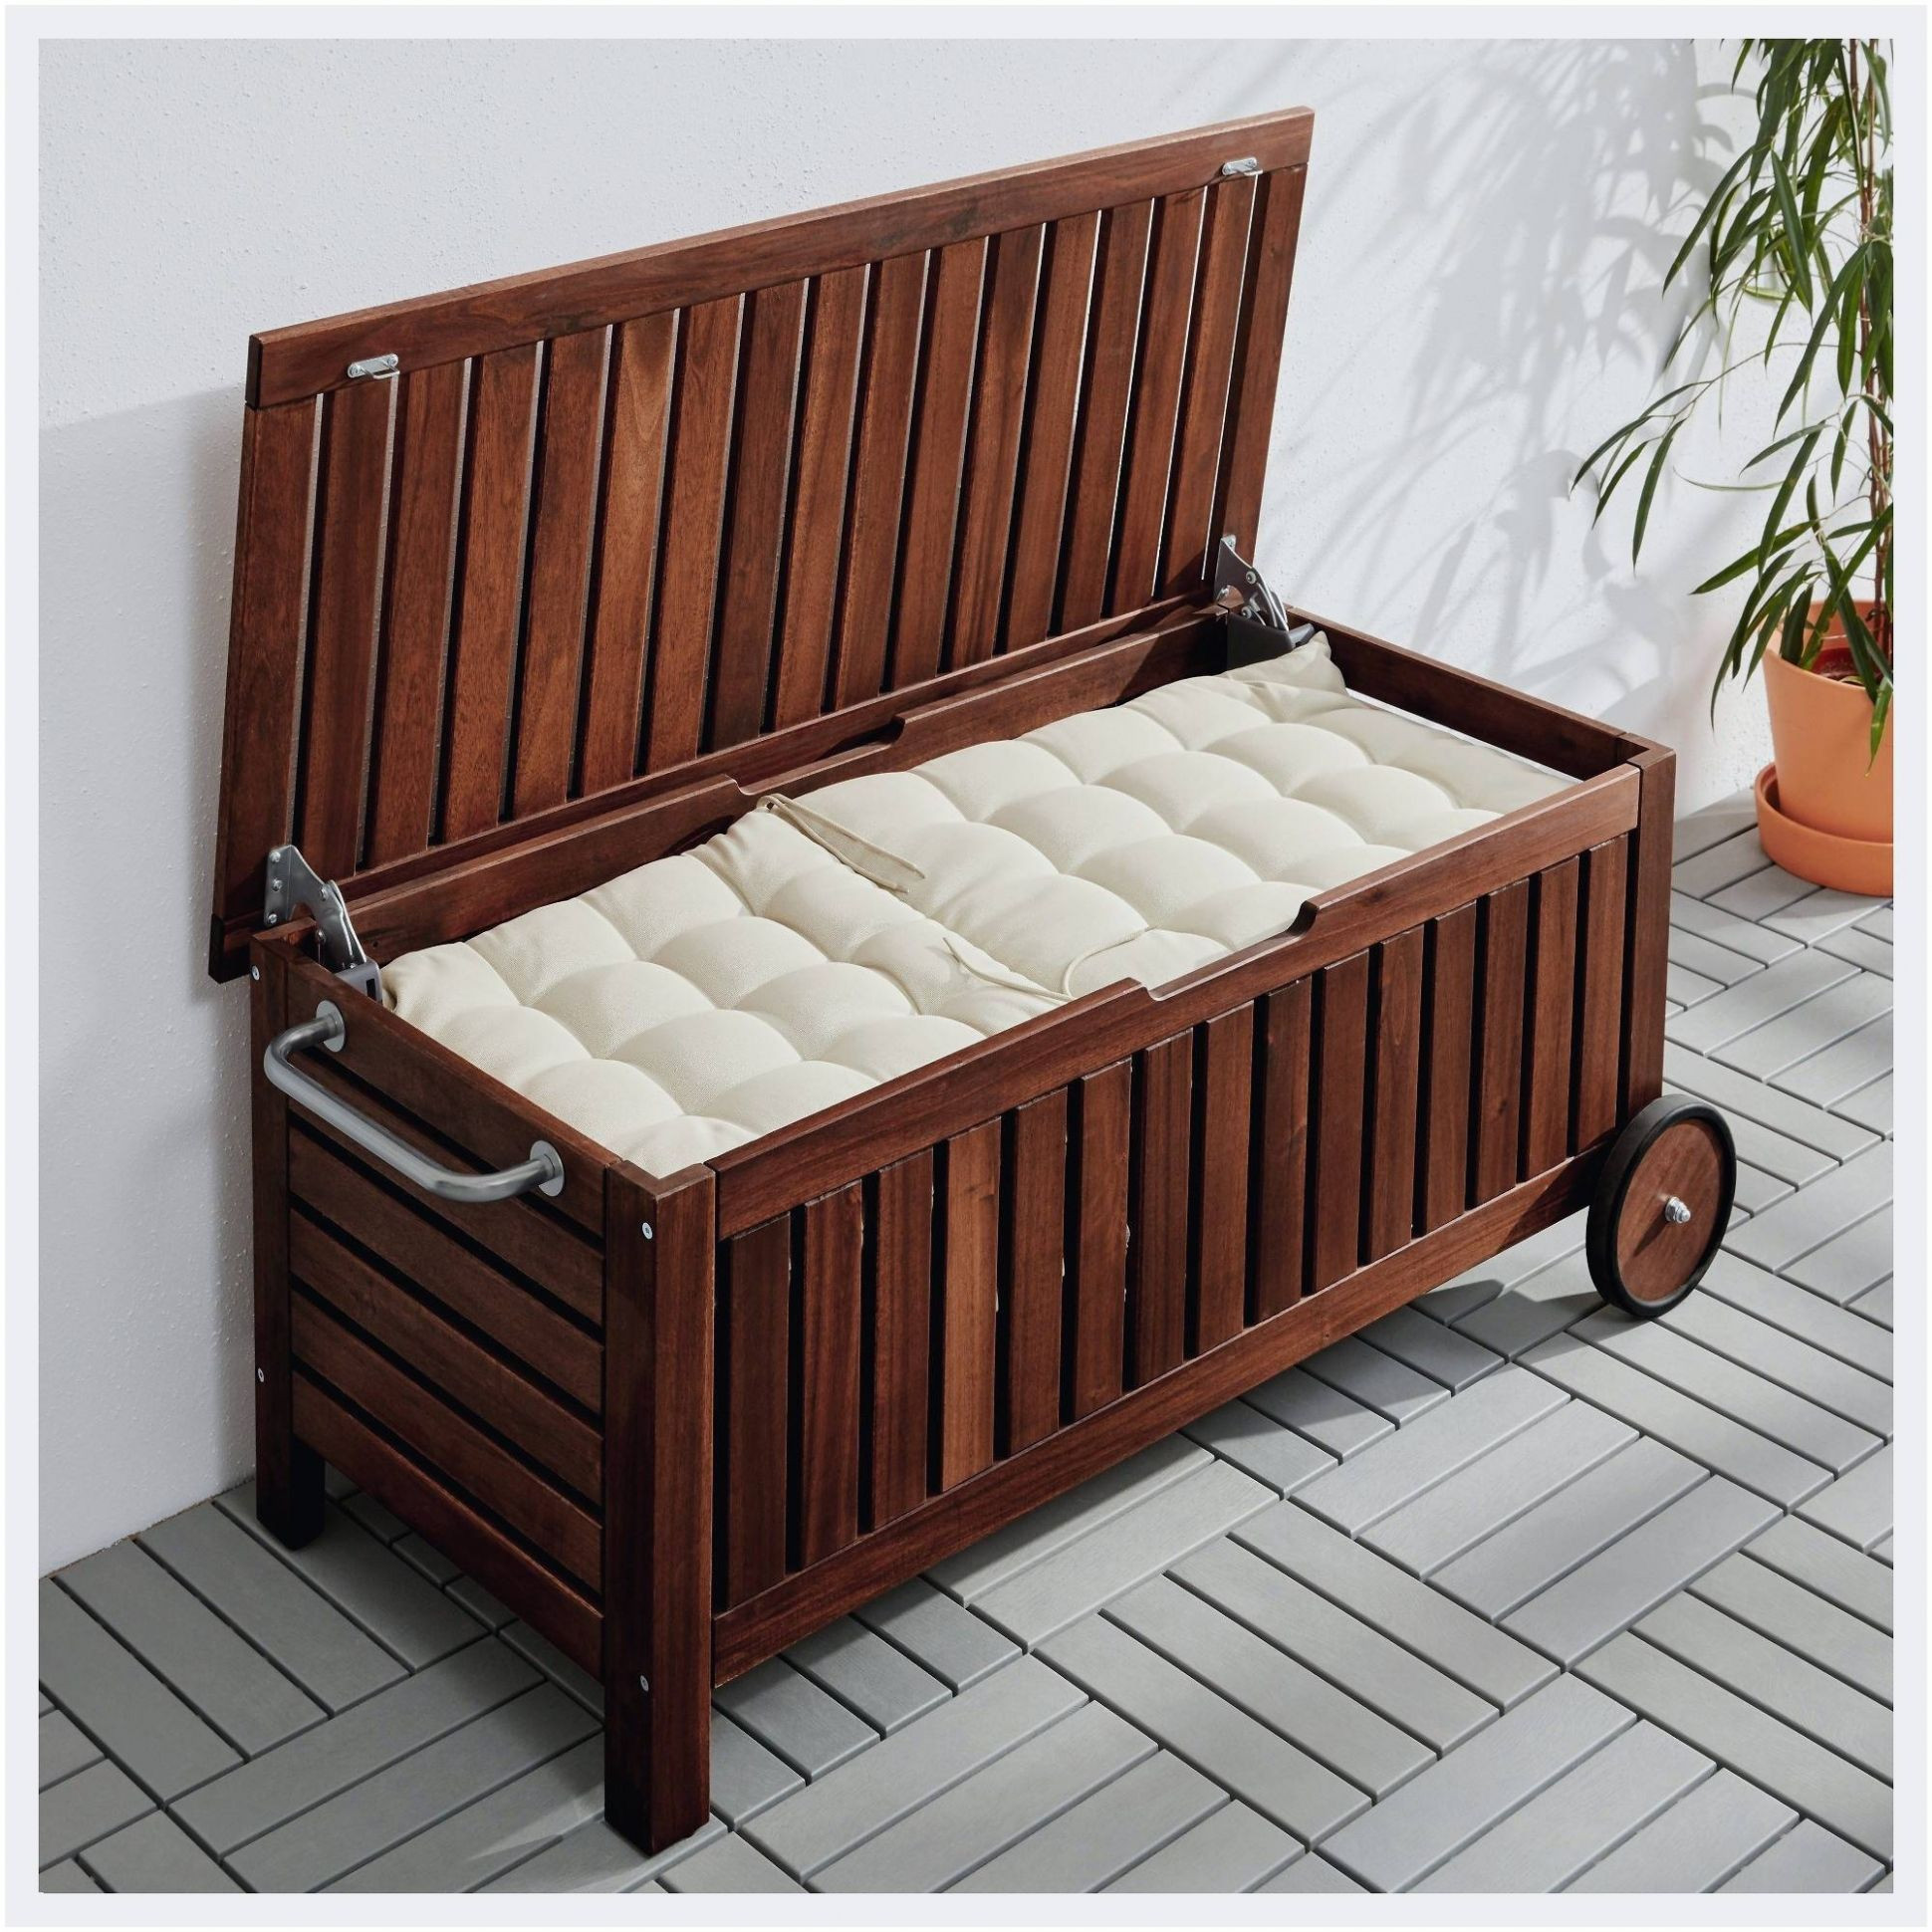 Wooden Bench With Storage Plans
 Wooden Bench with Storage Plans